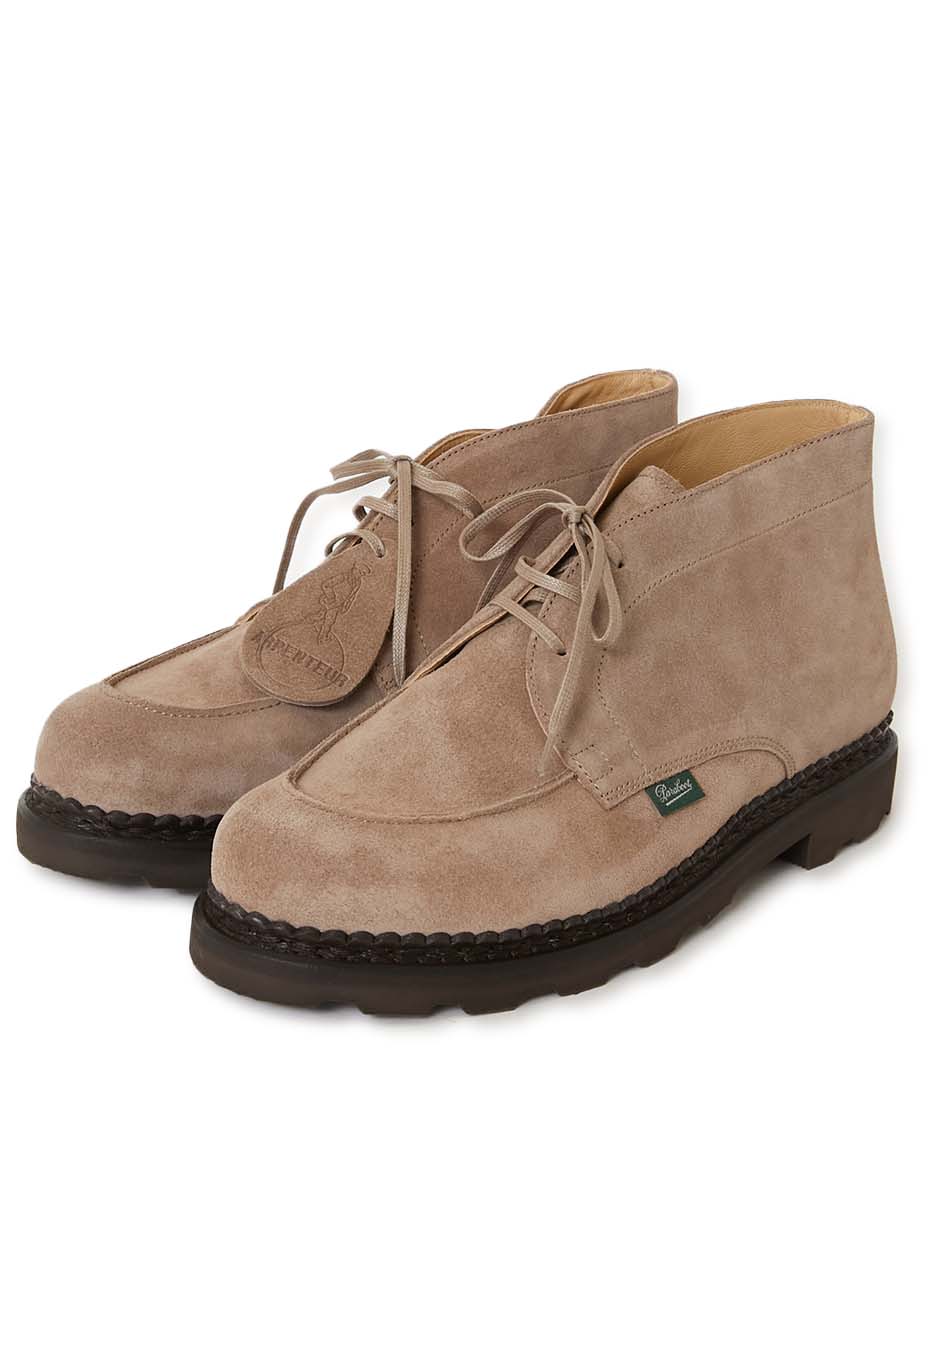 PARABOOTS FOR ARPENTEUR CHUKKA SUEDE SHOES